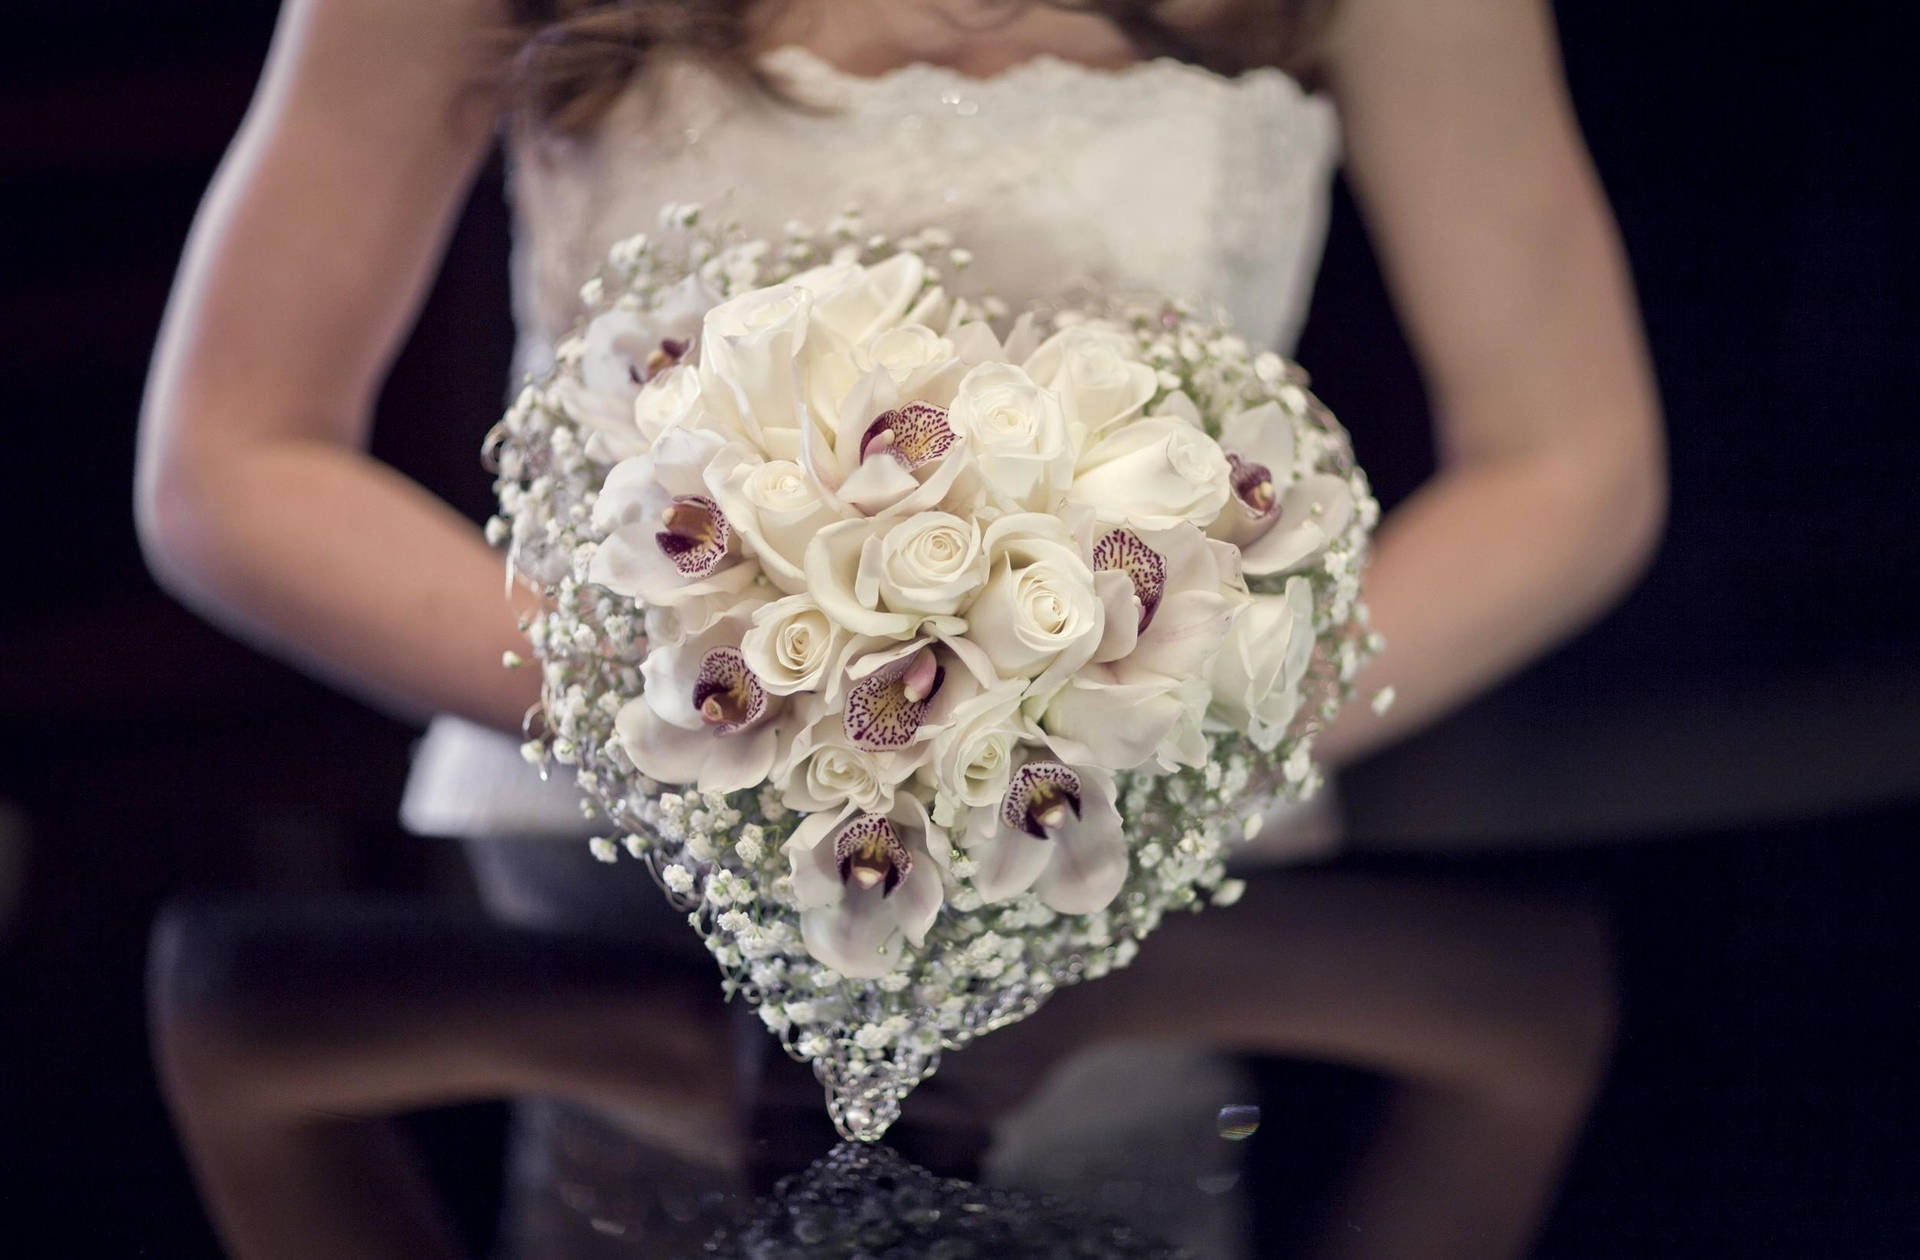 Bride With Heart Roses Bouquet